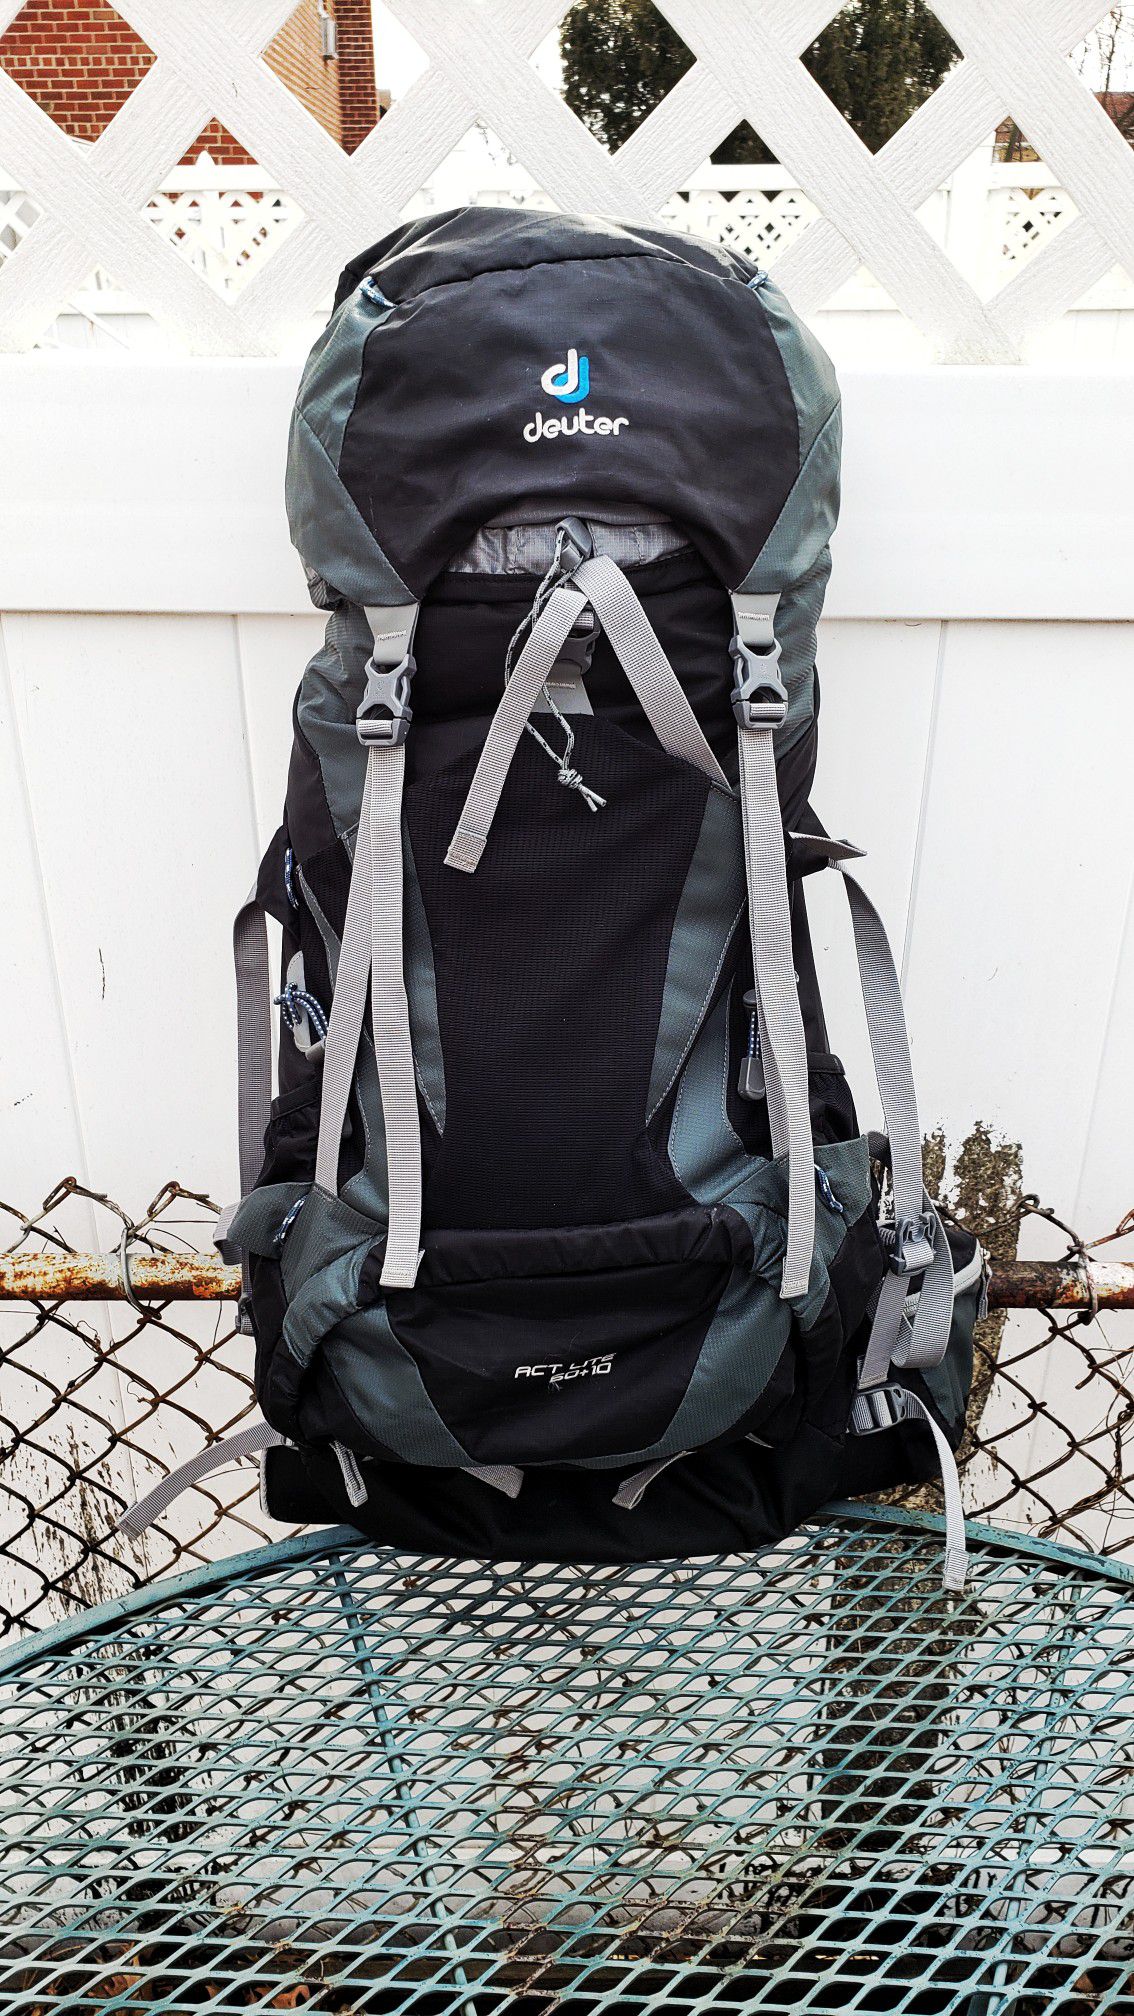 Deuter backpack with free duffle bag!